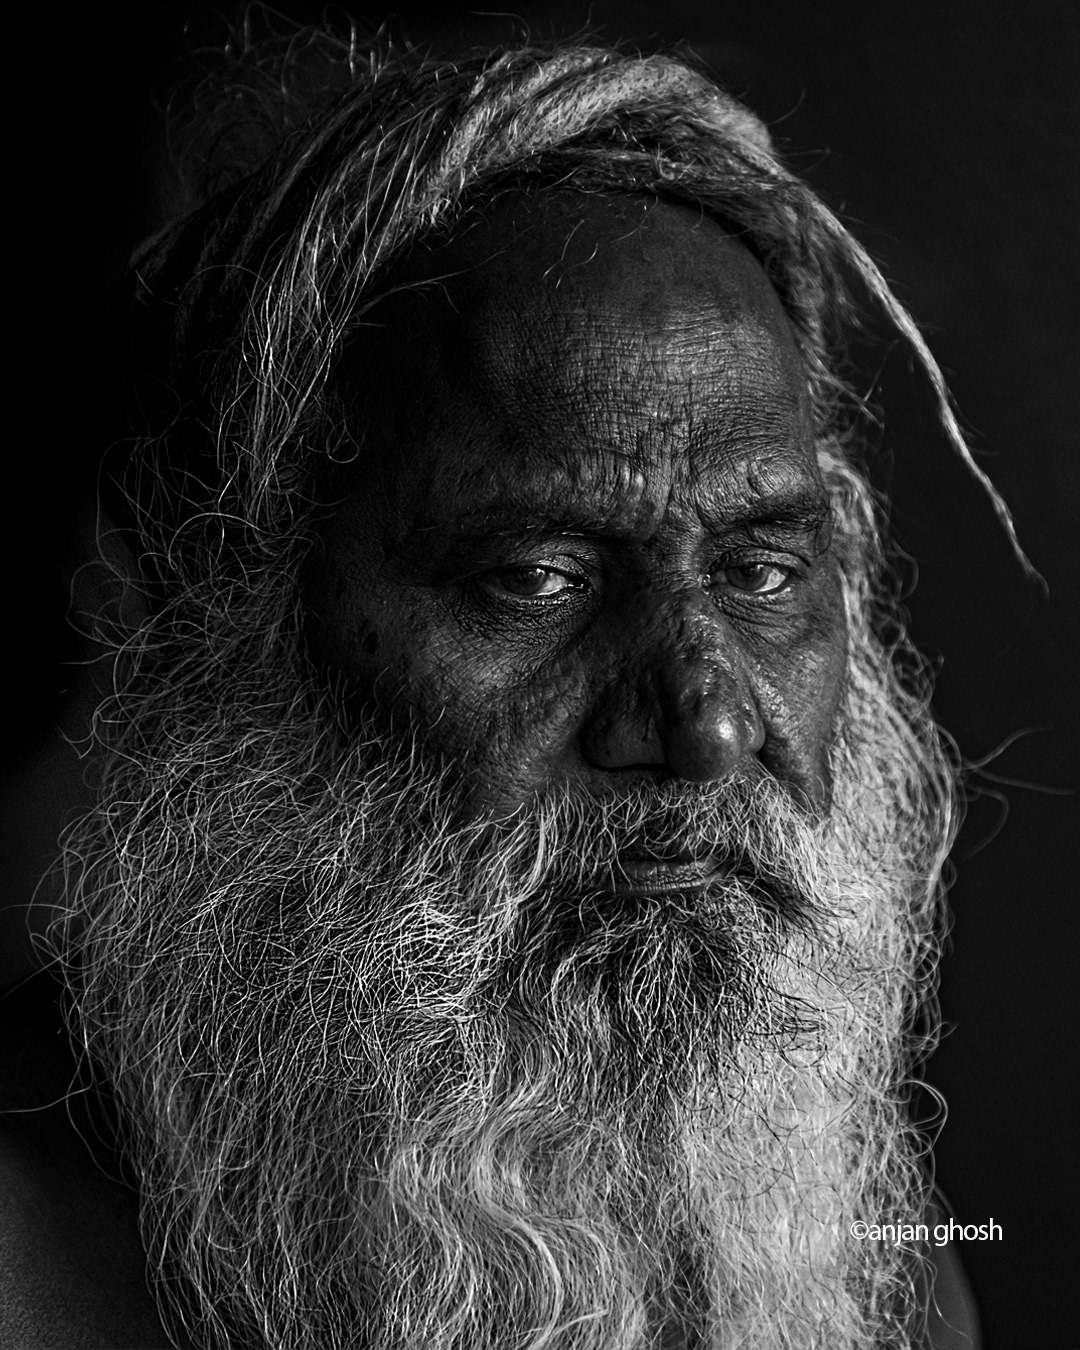 human face portrait Photography  RuralIndia travelphotography streetphotography people black and white street photography storytelling photography